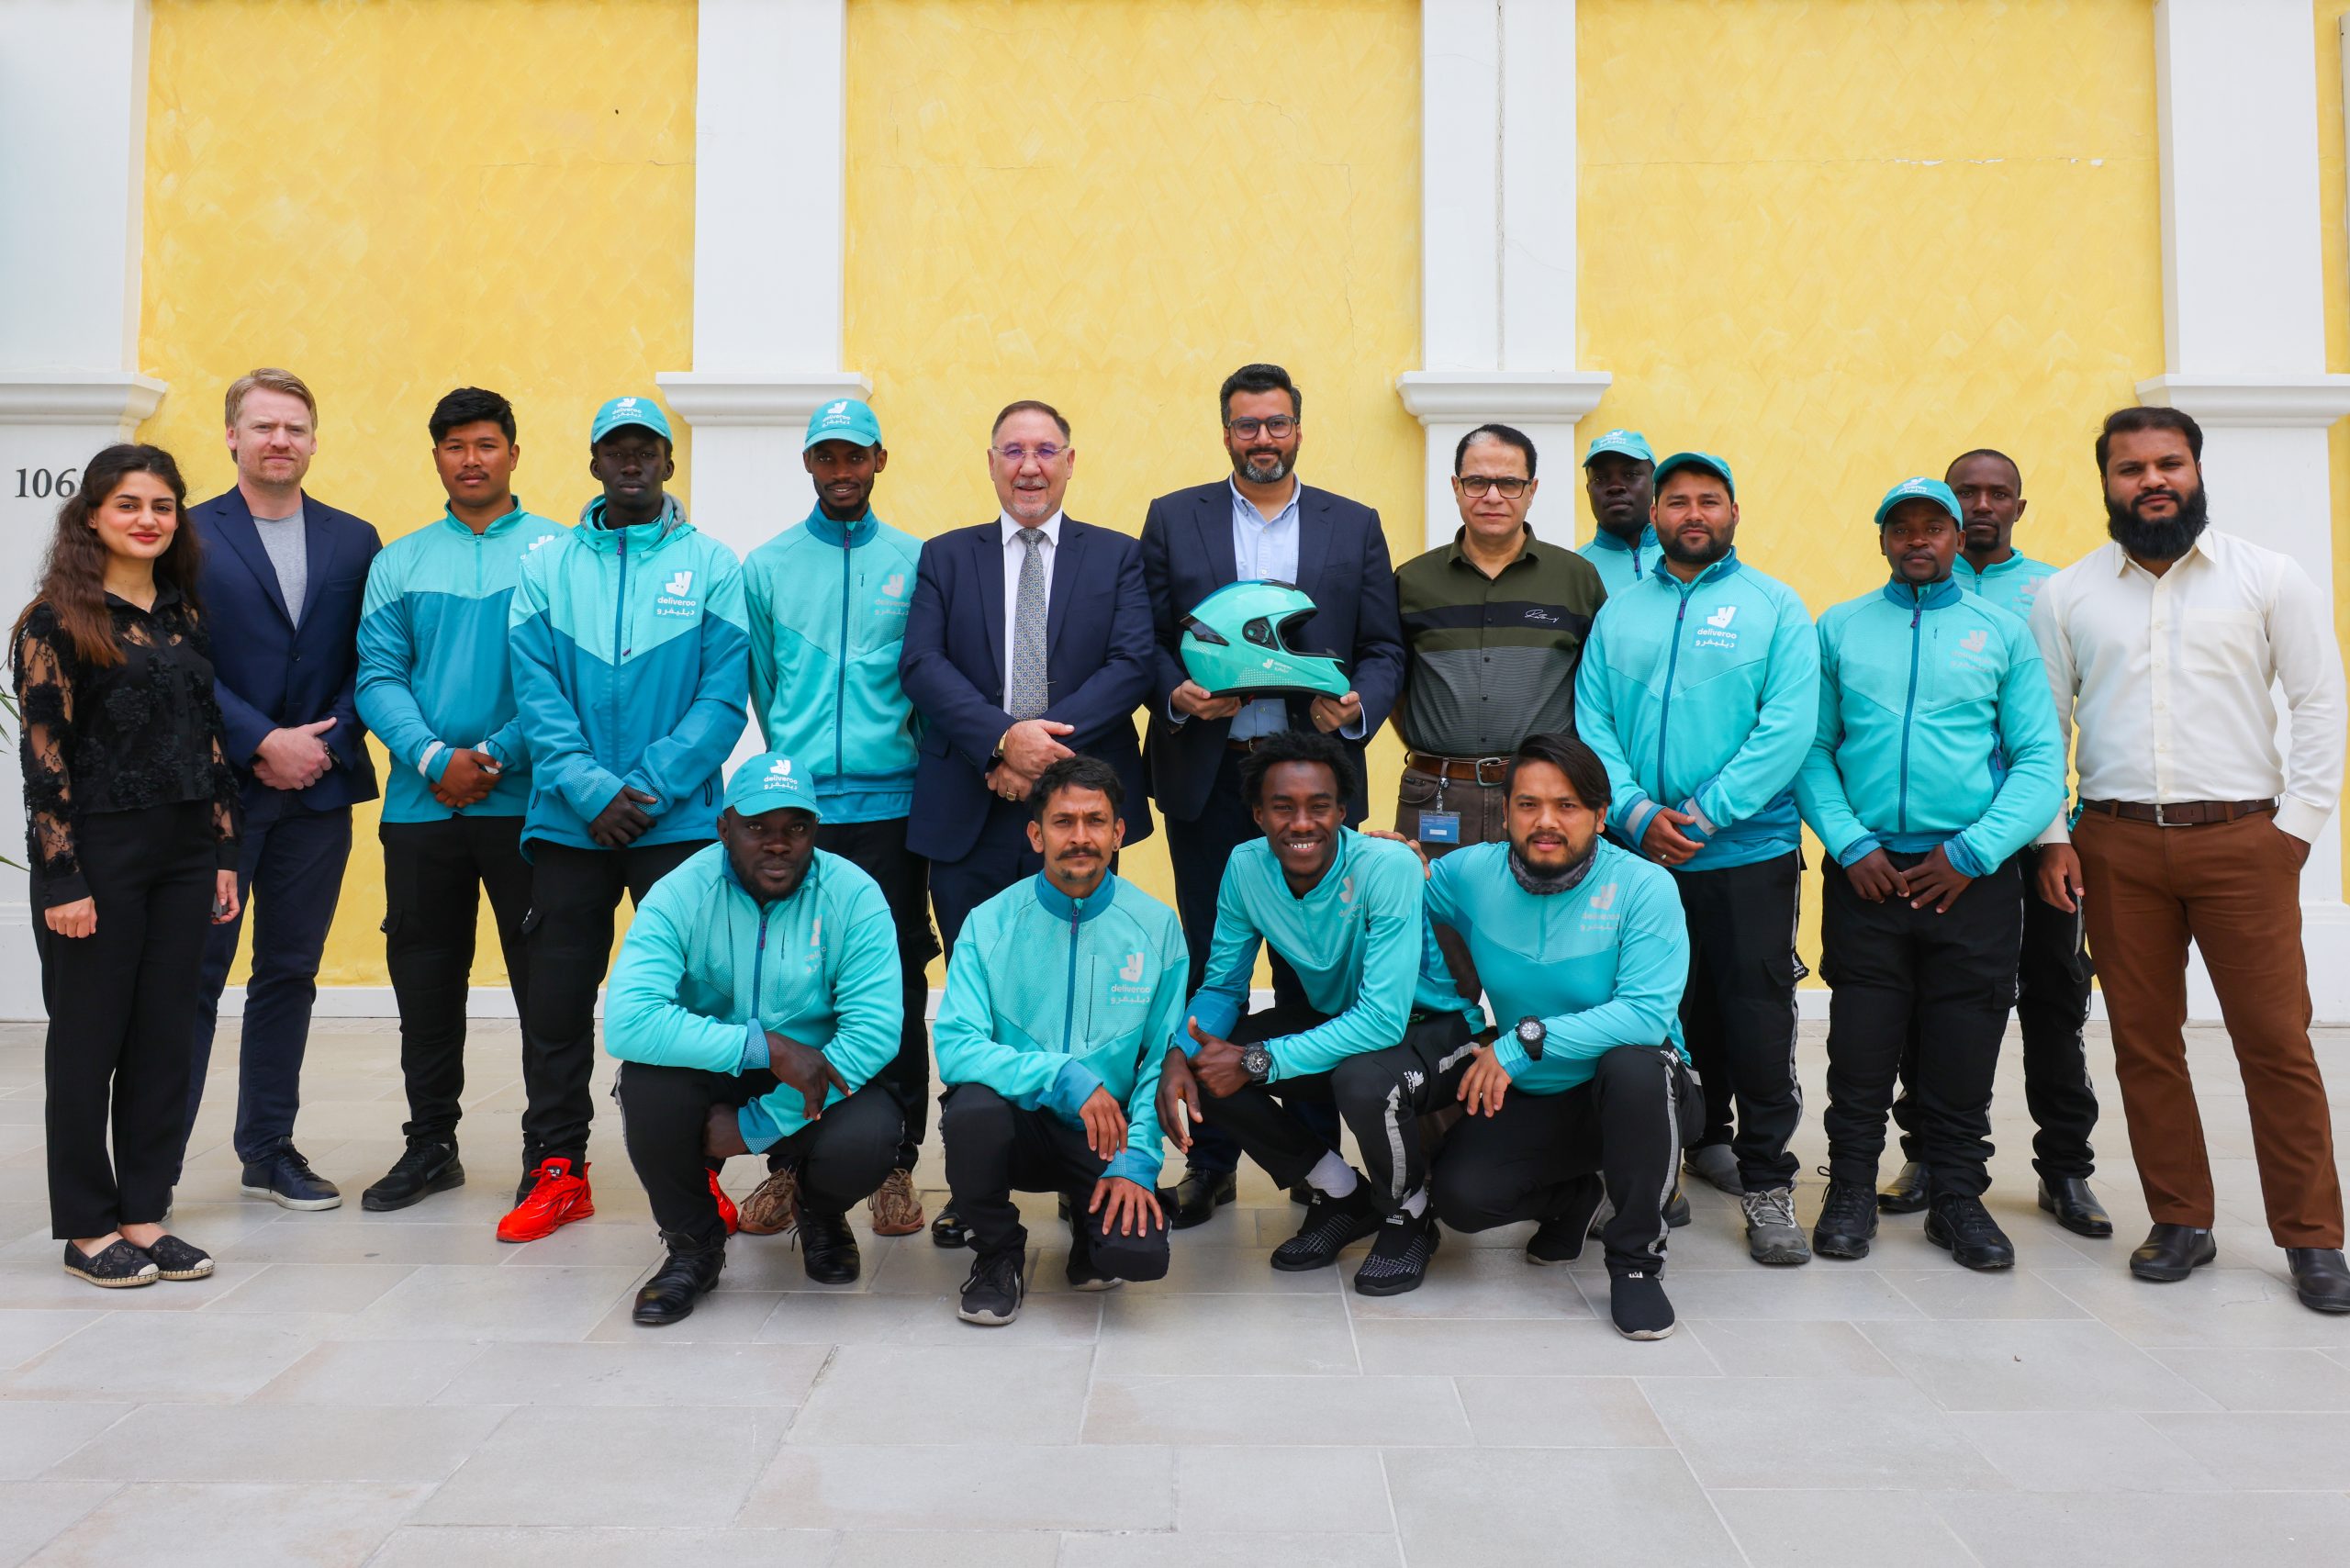 Deliveroo Qatar kicks off Ramadan Riders Awareness Programme with support from Supreme Committee for Delivery & Legacy